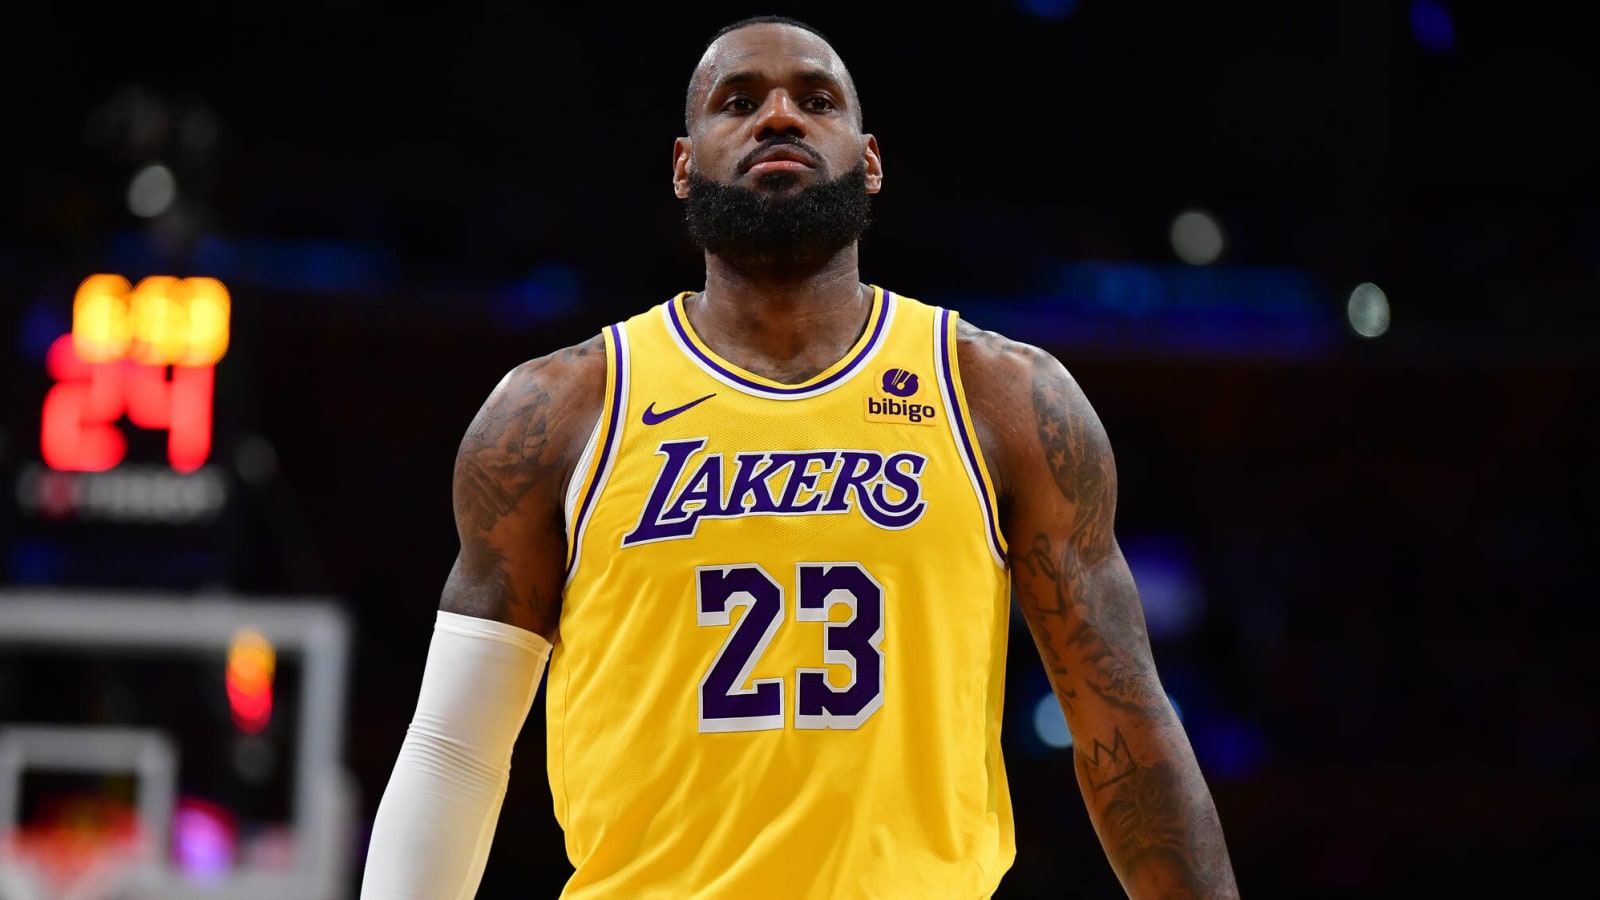 LeBron James shares message about his future